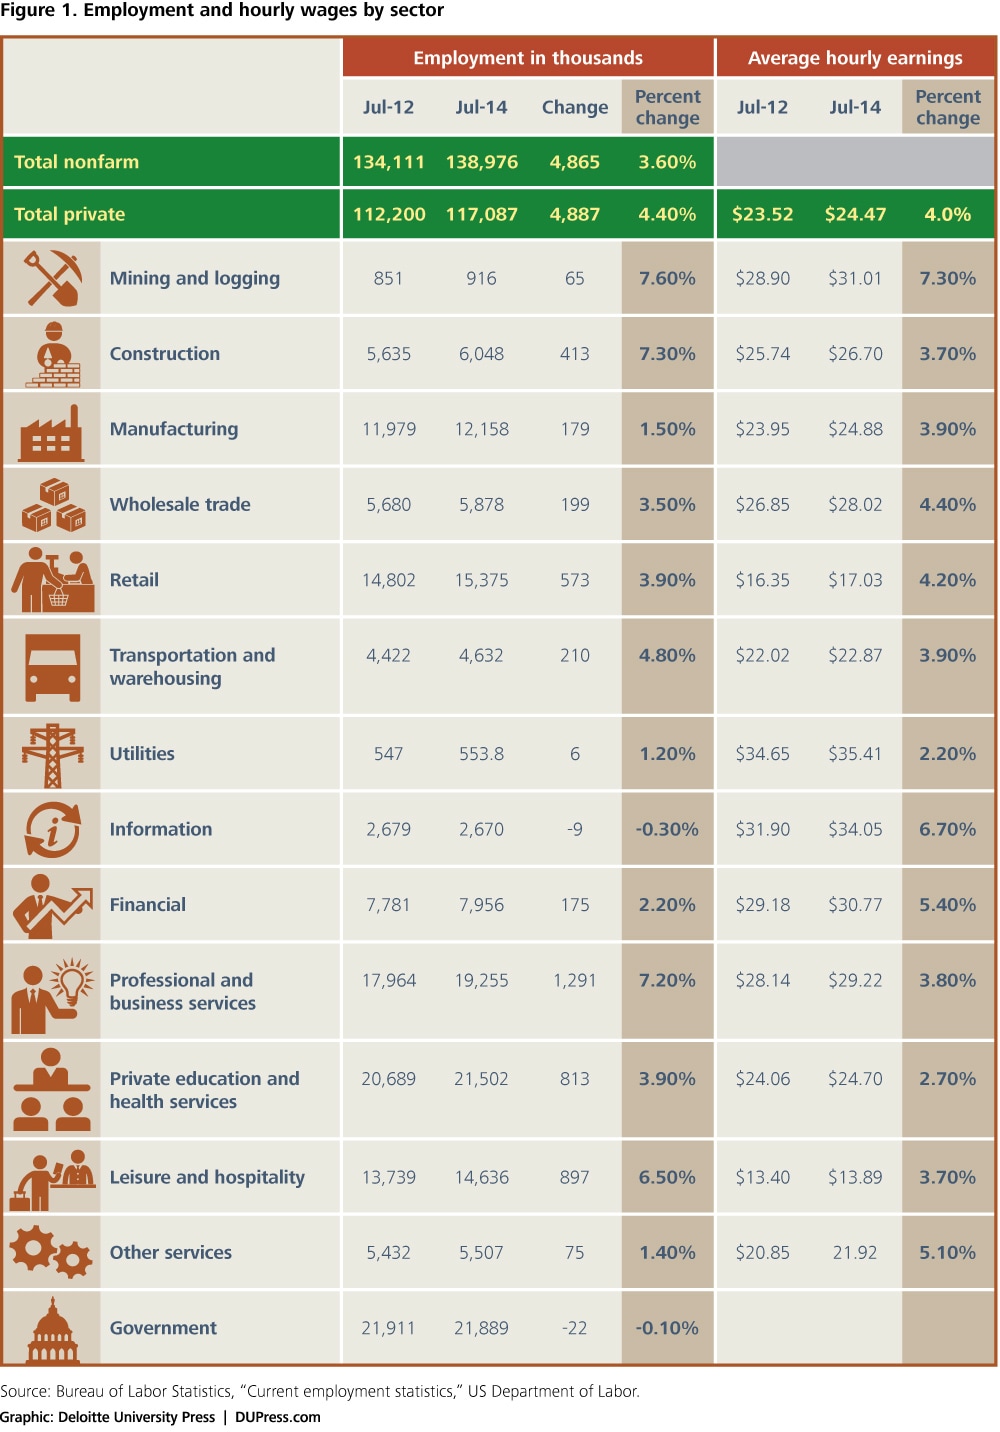 Figure 1. Employment and hourly wages by sector